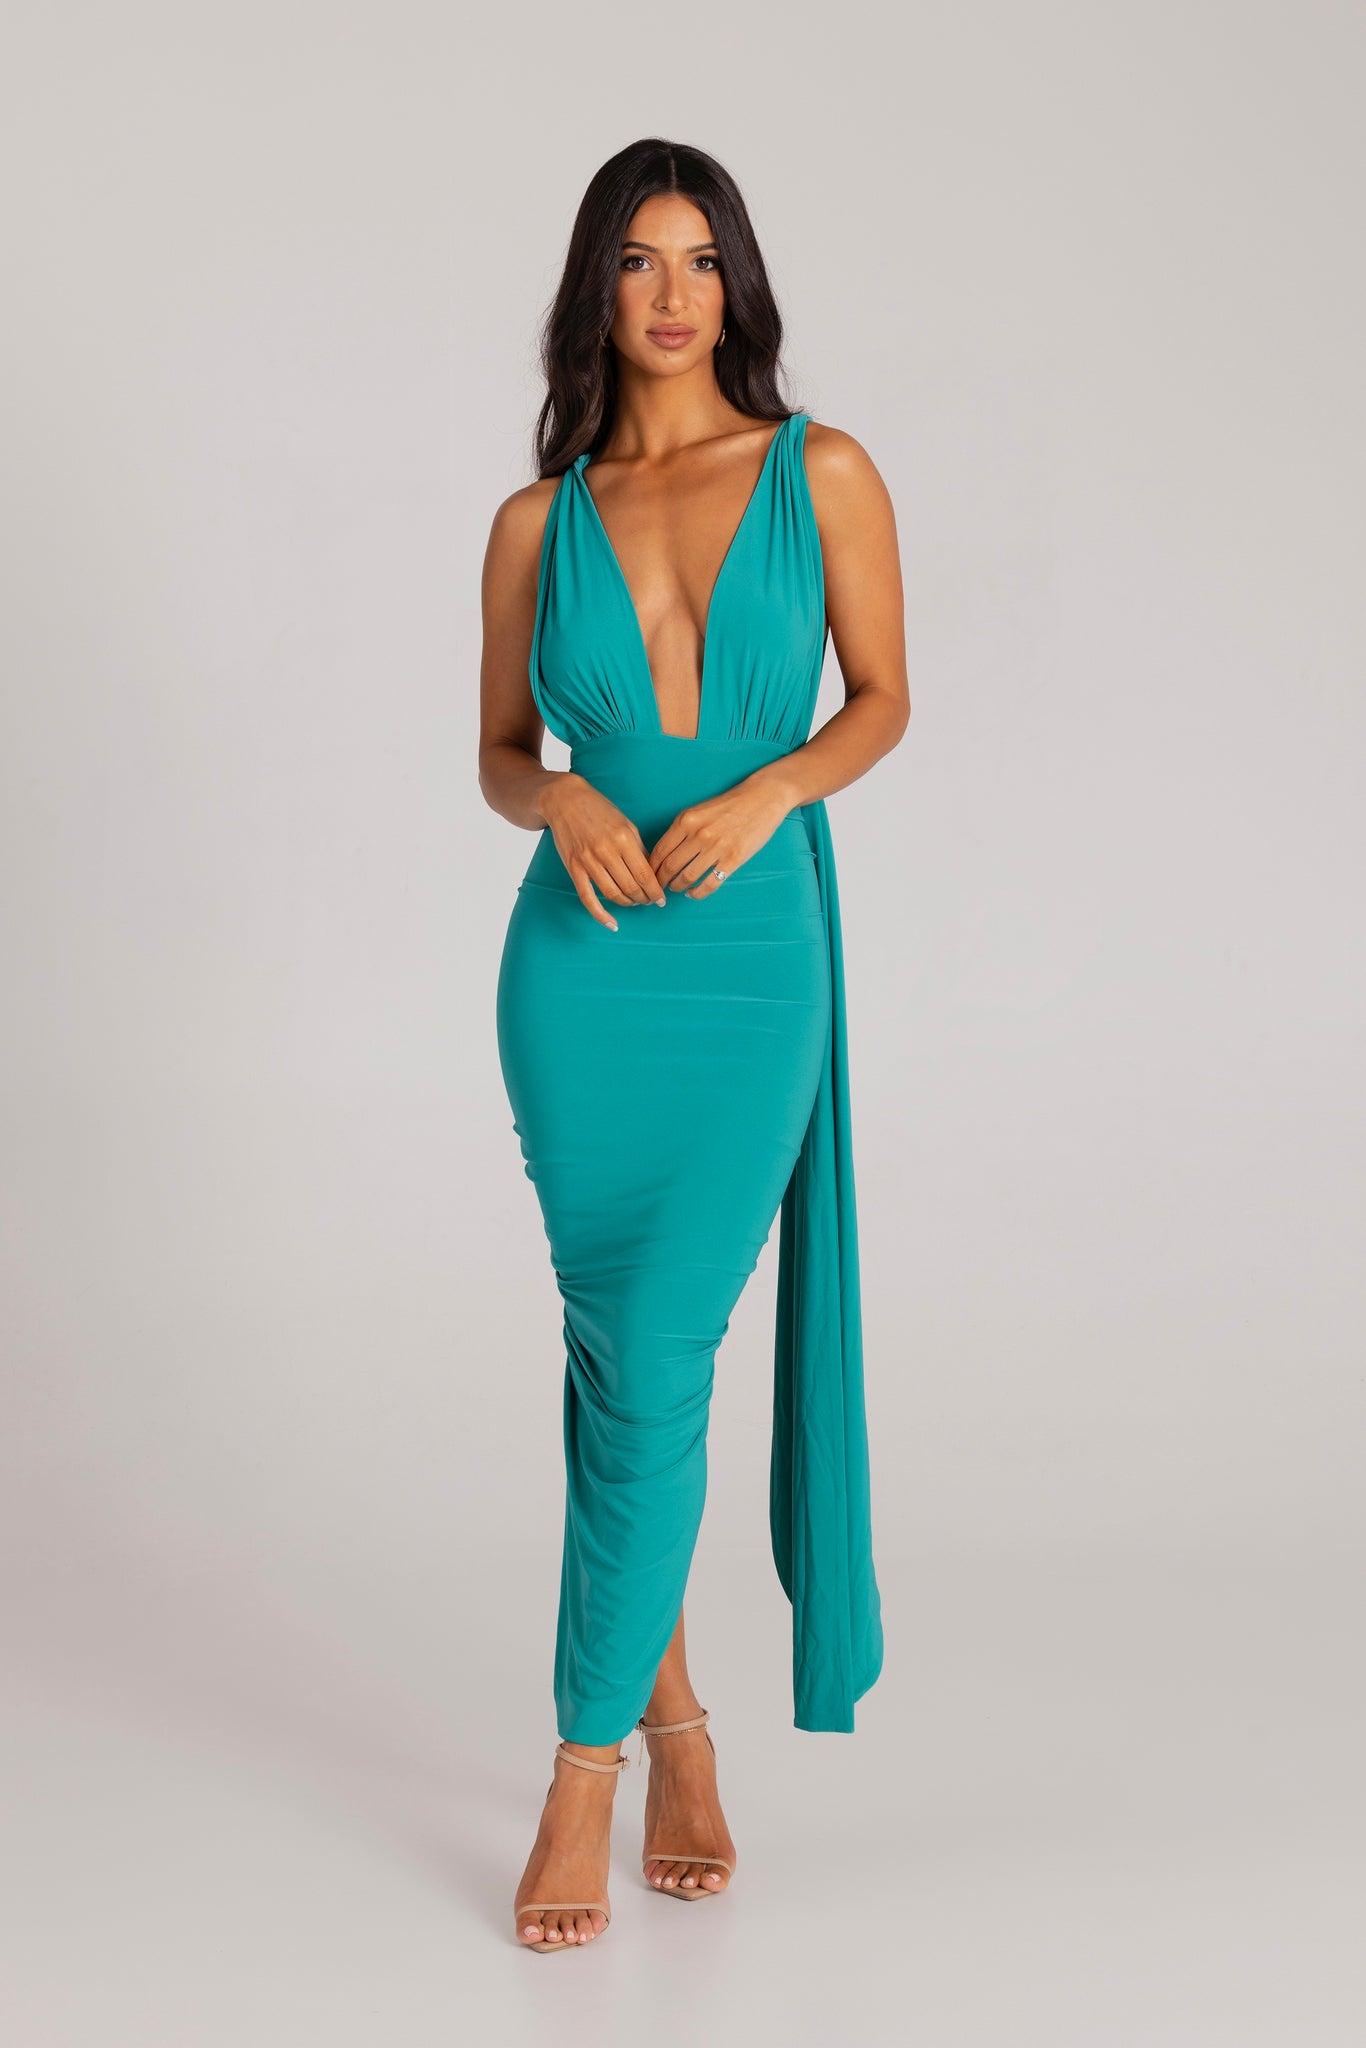 MÉLANI The Label MELROSE Jade Multi Tie Plunge Form Fitted Midi Dress